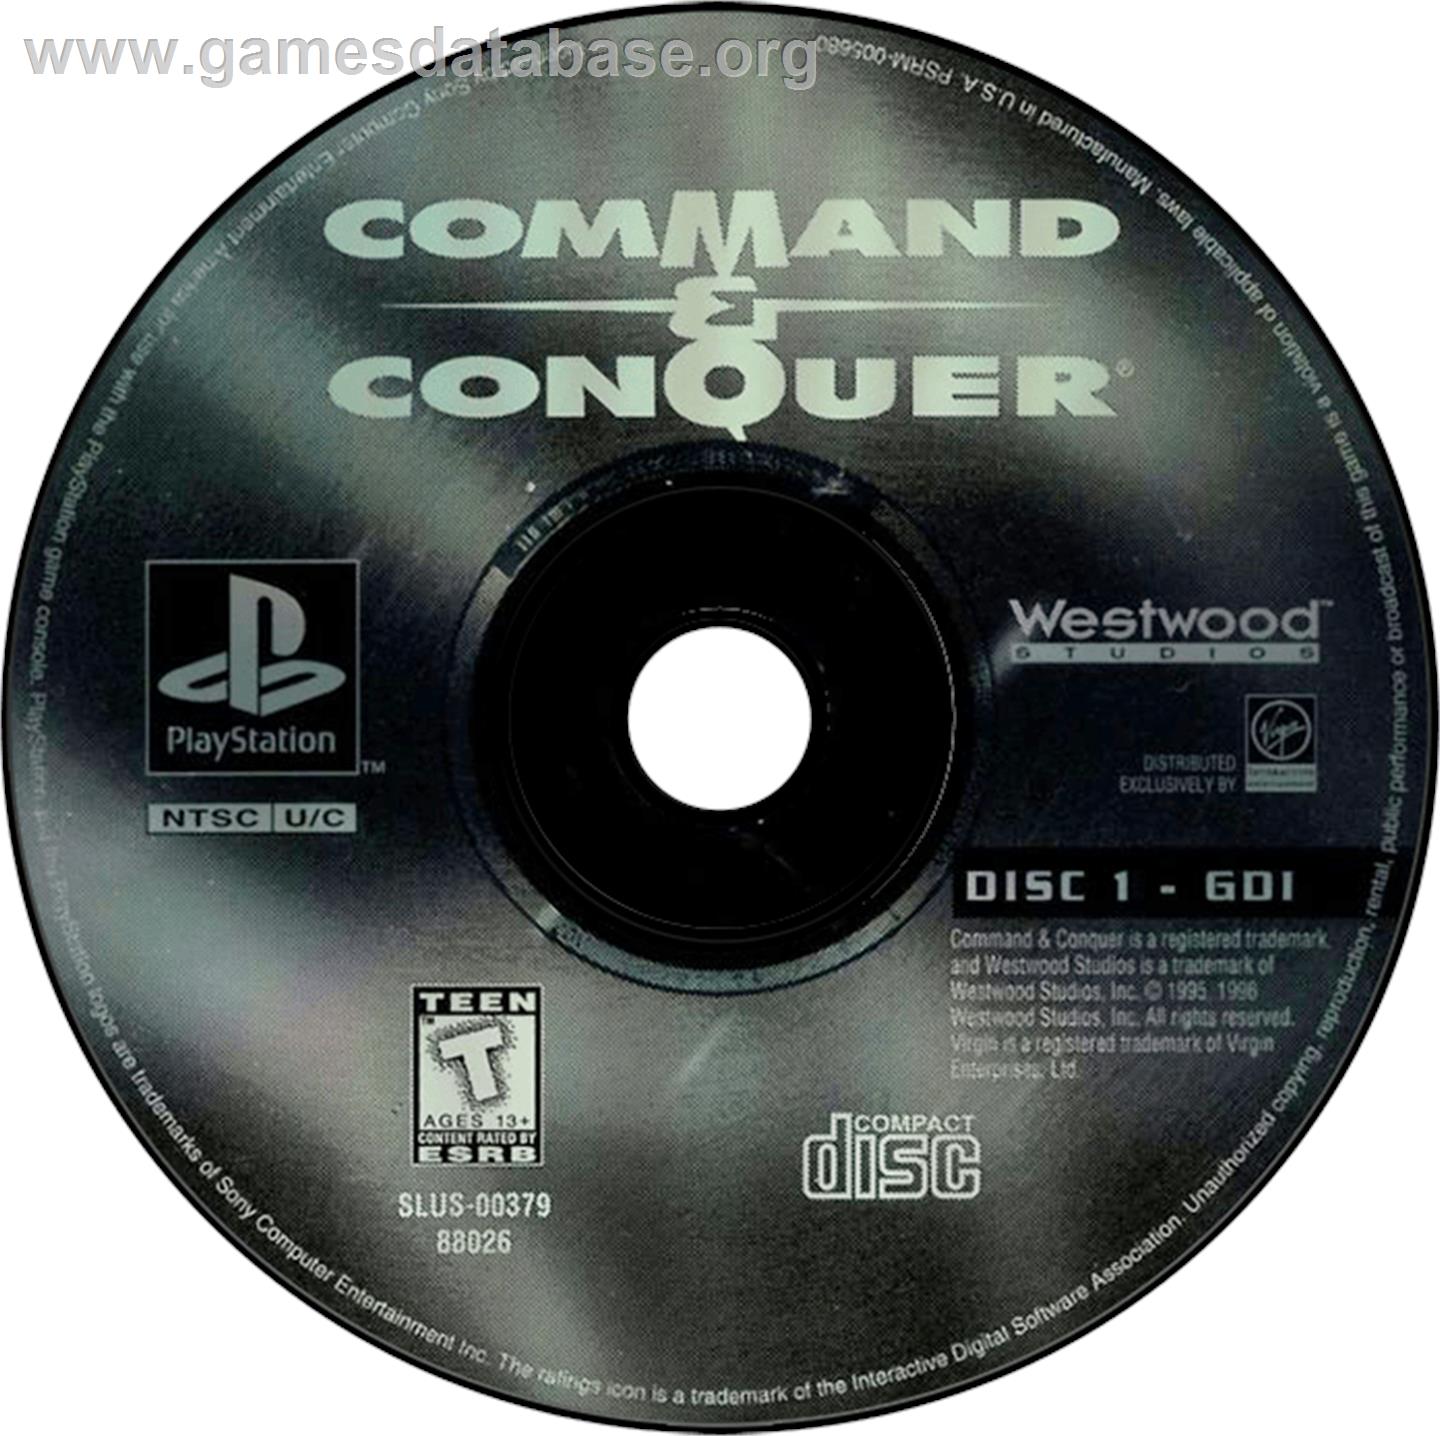 Command & Conquer - Sony Playstation - Artwork - Disc